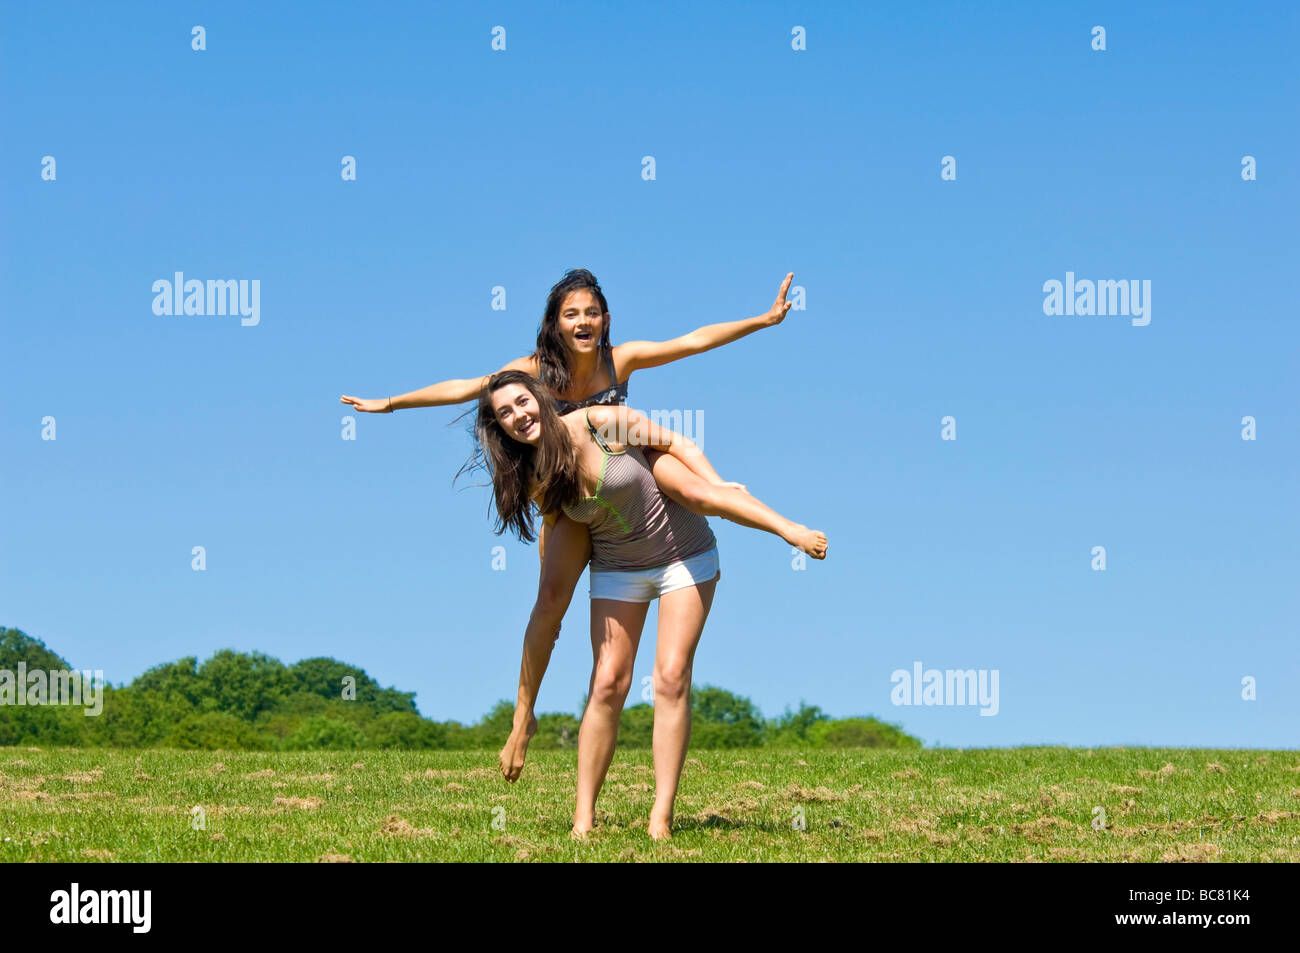 Horizontal portrait of two teenage girls having fun having a piggy back ride in a park on a bright sunny day Stock Photo